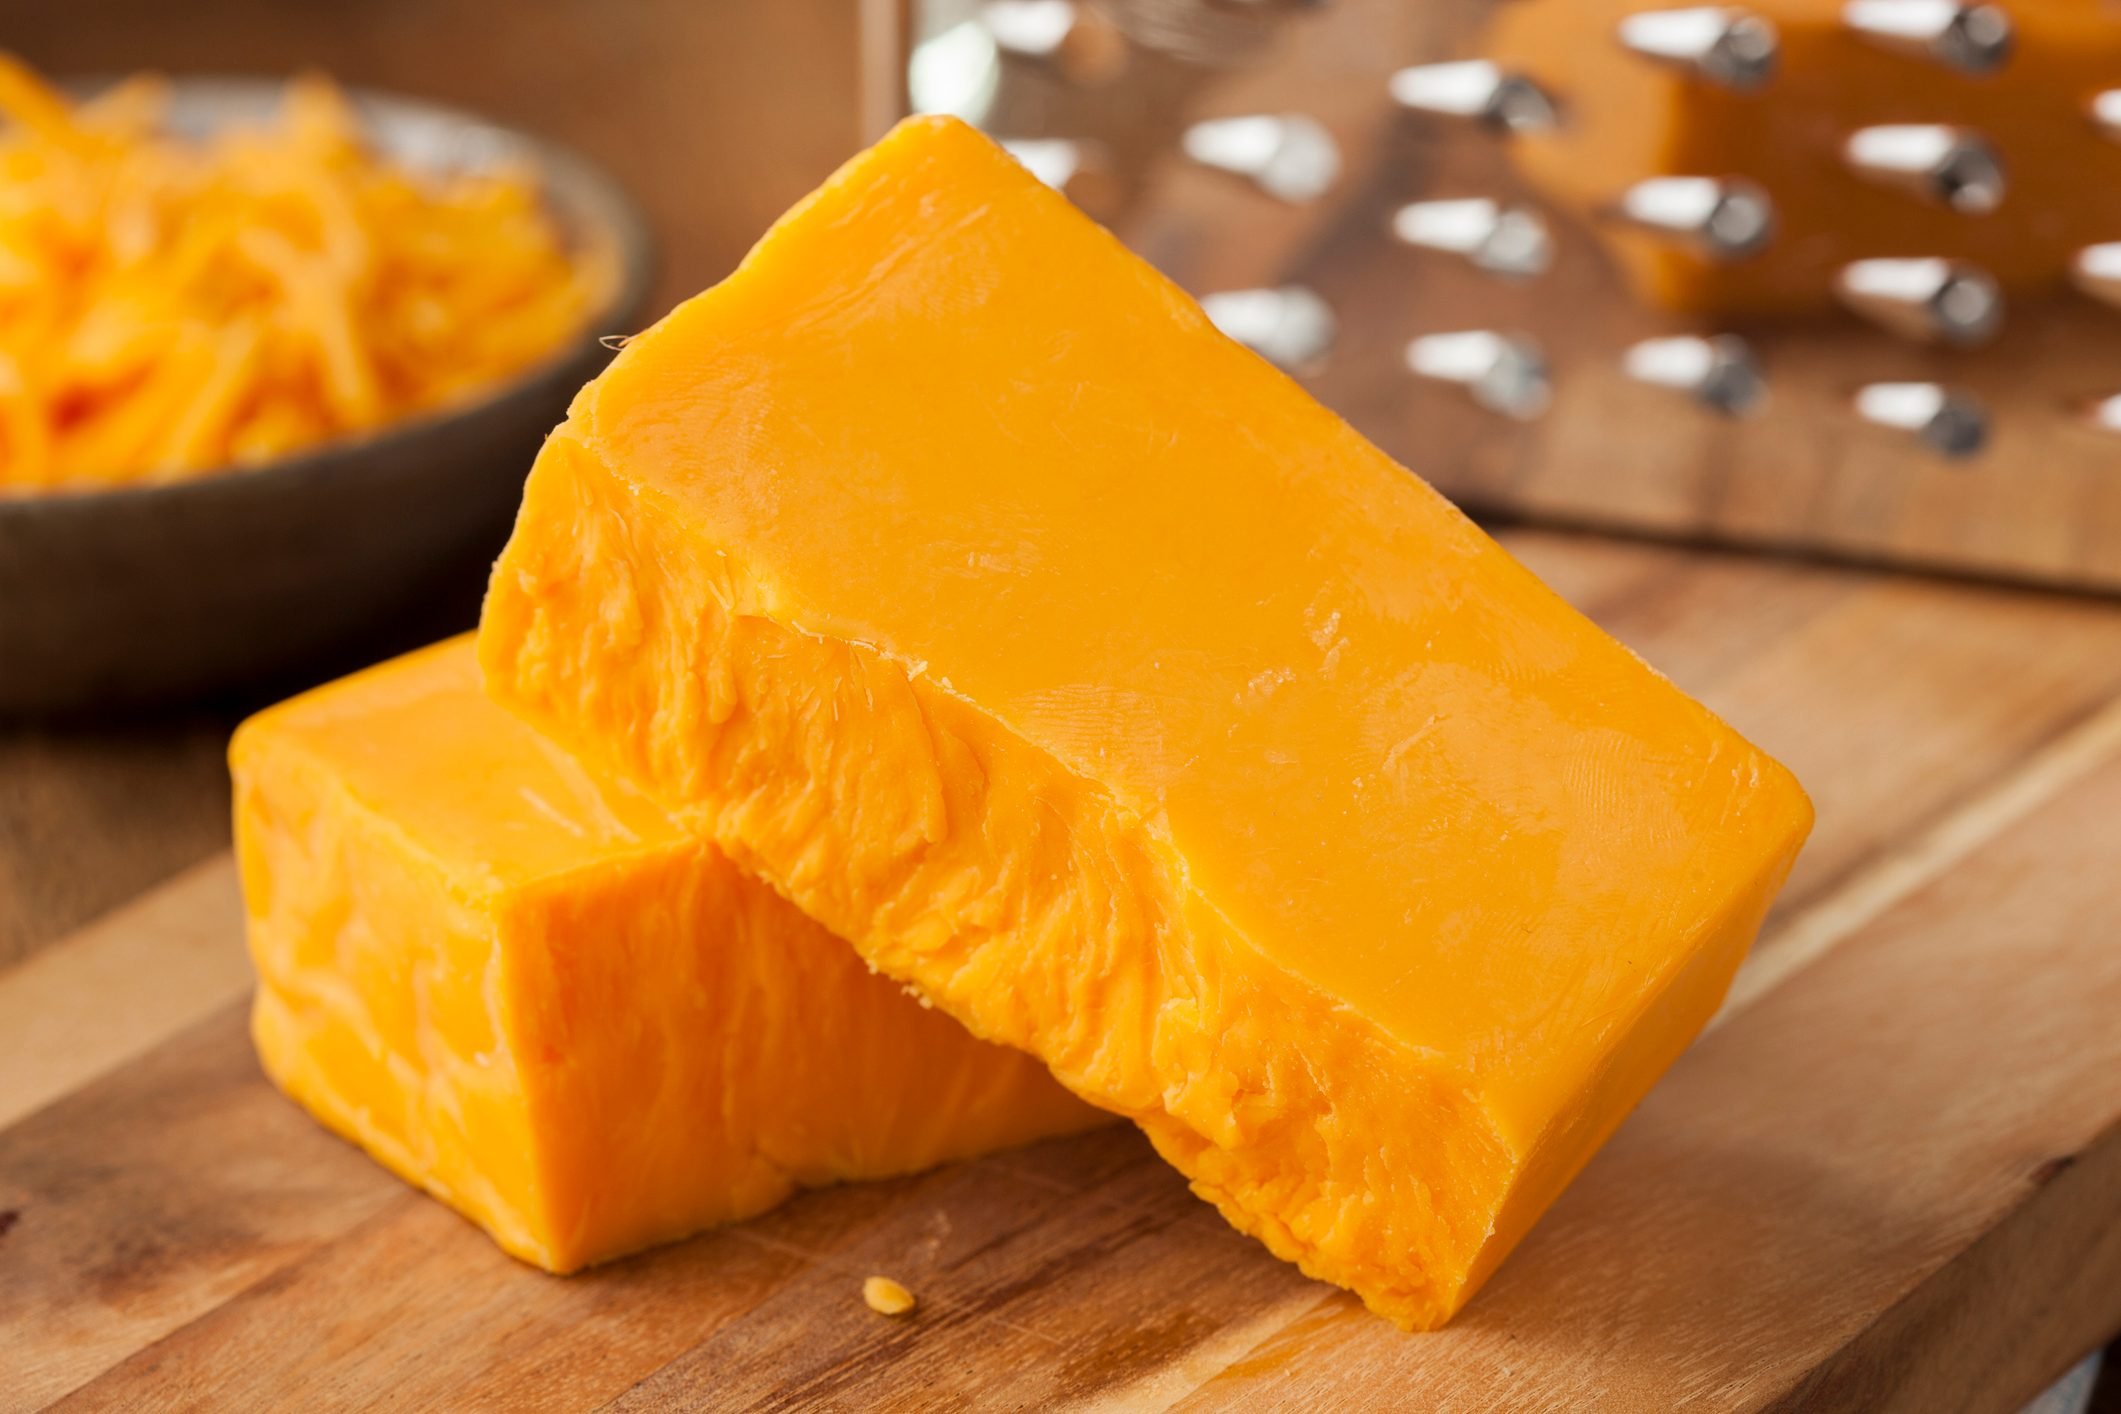 Why Is Cheddar Cheese Orange Sometimes?